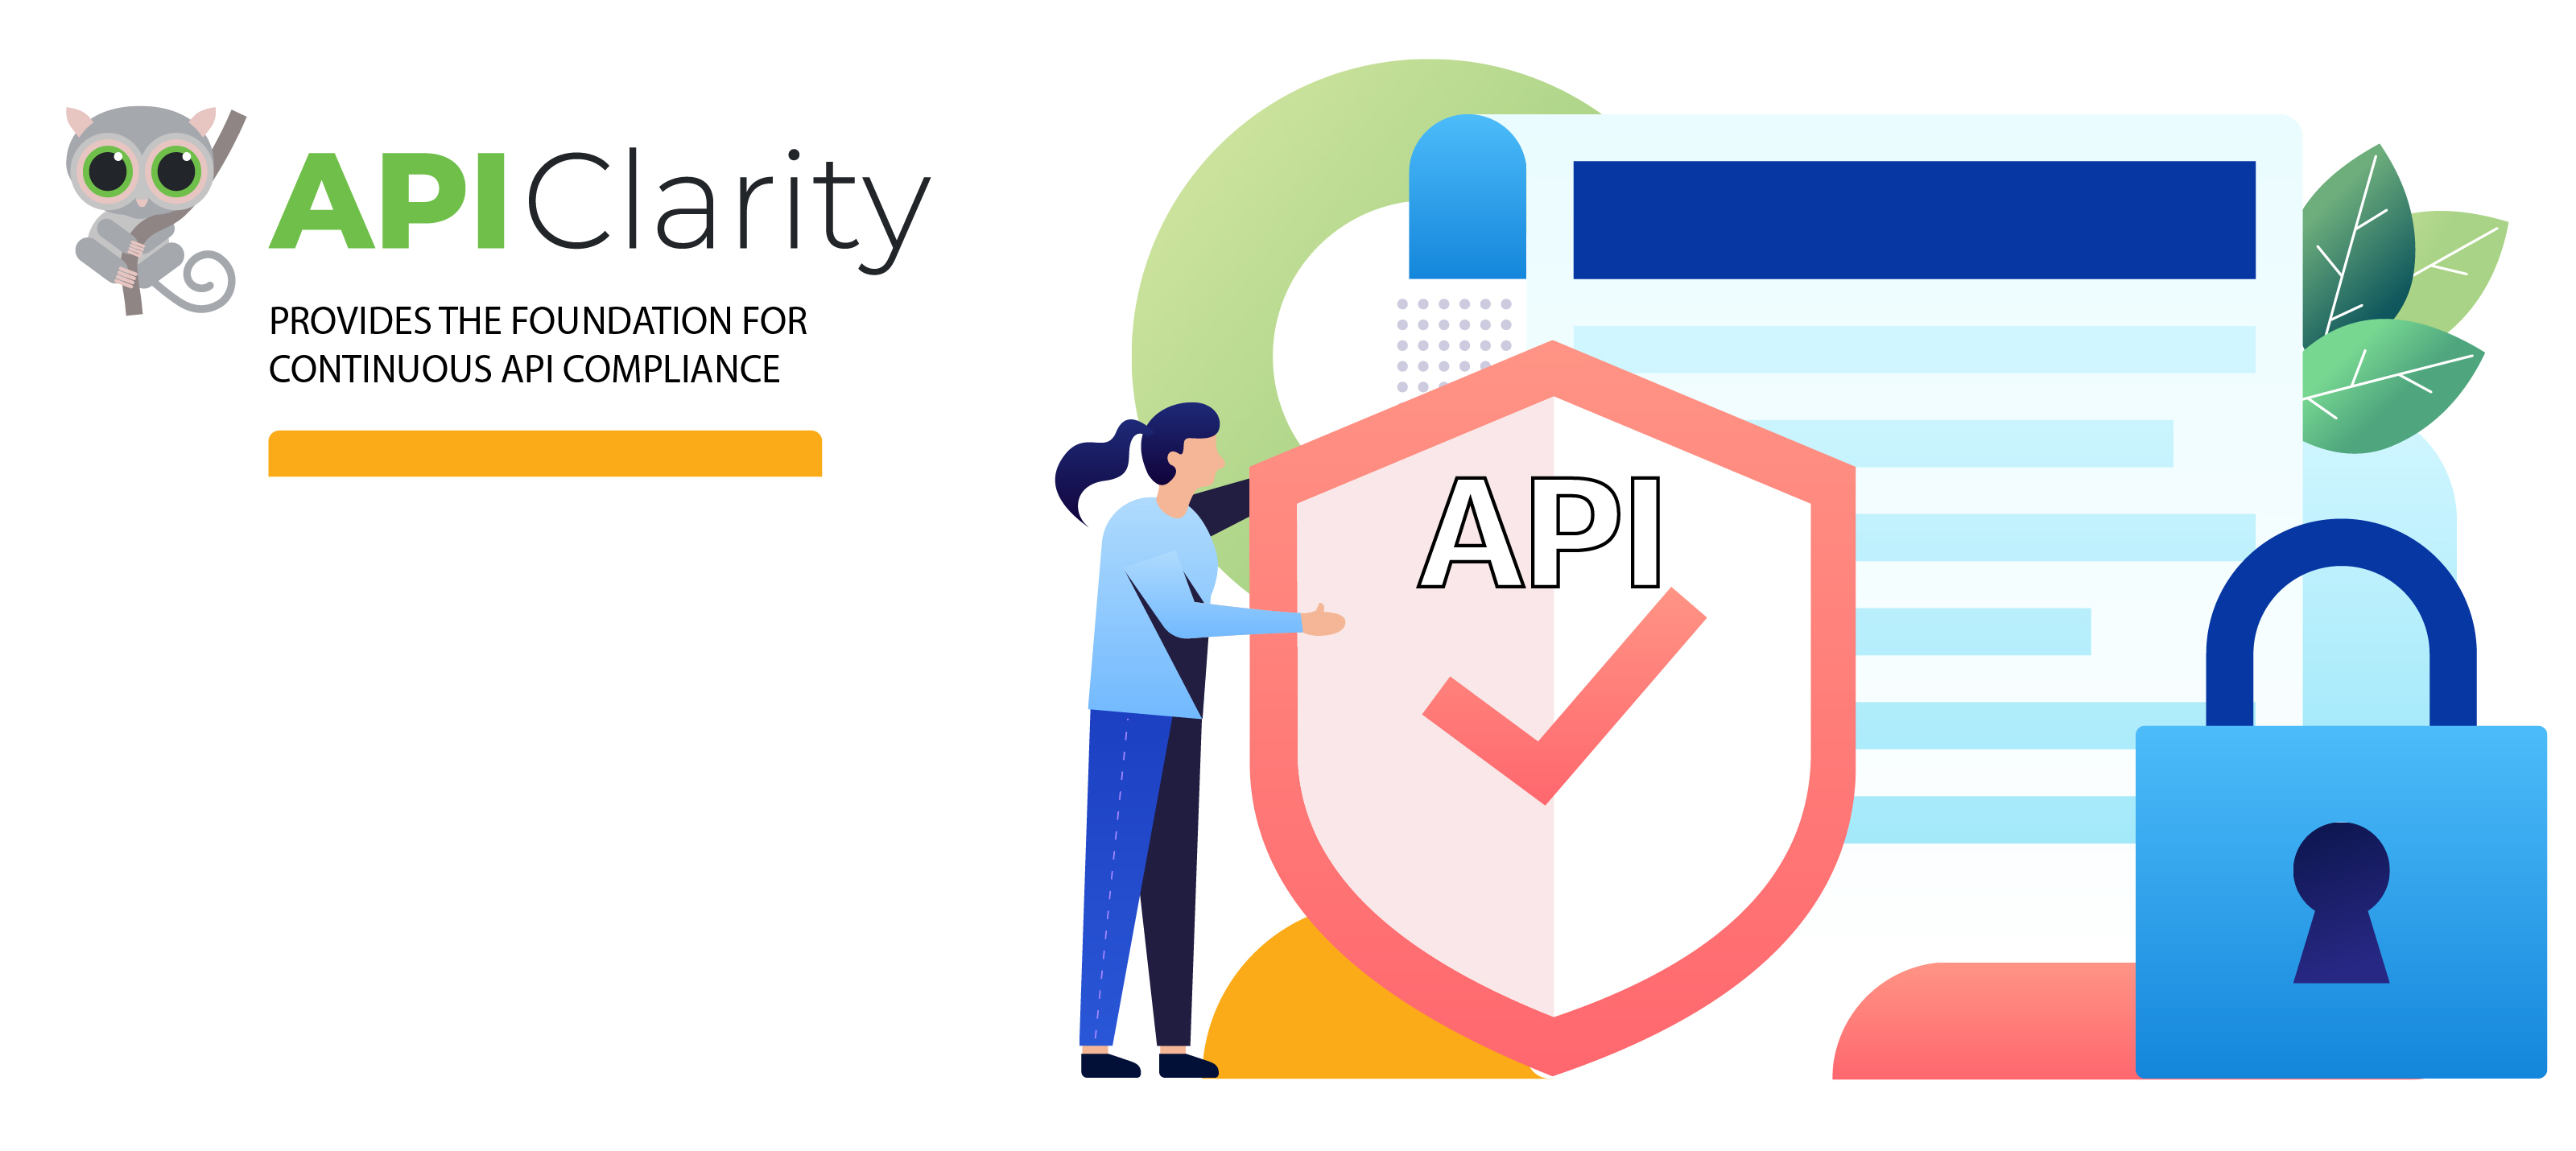 Shifting Left API Security - APIClarity Provides the Foundation for Con...